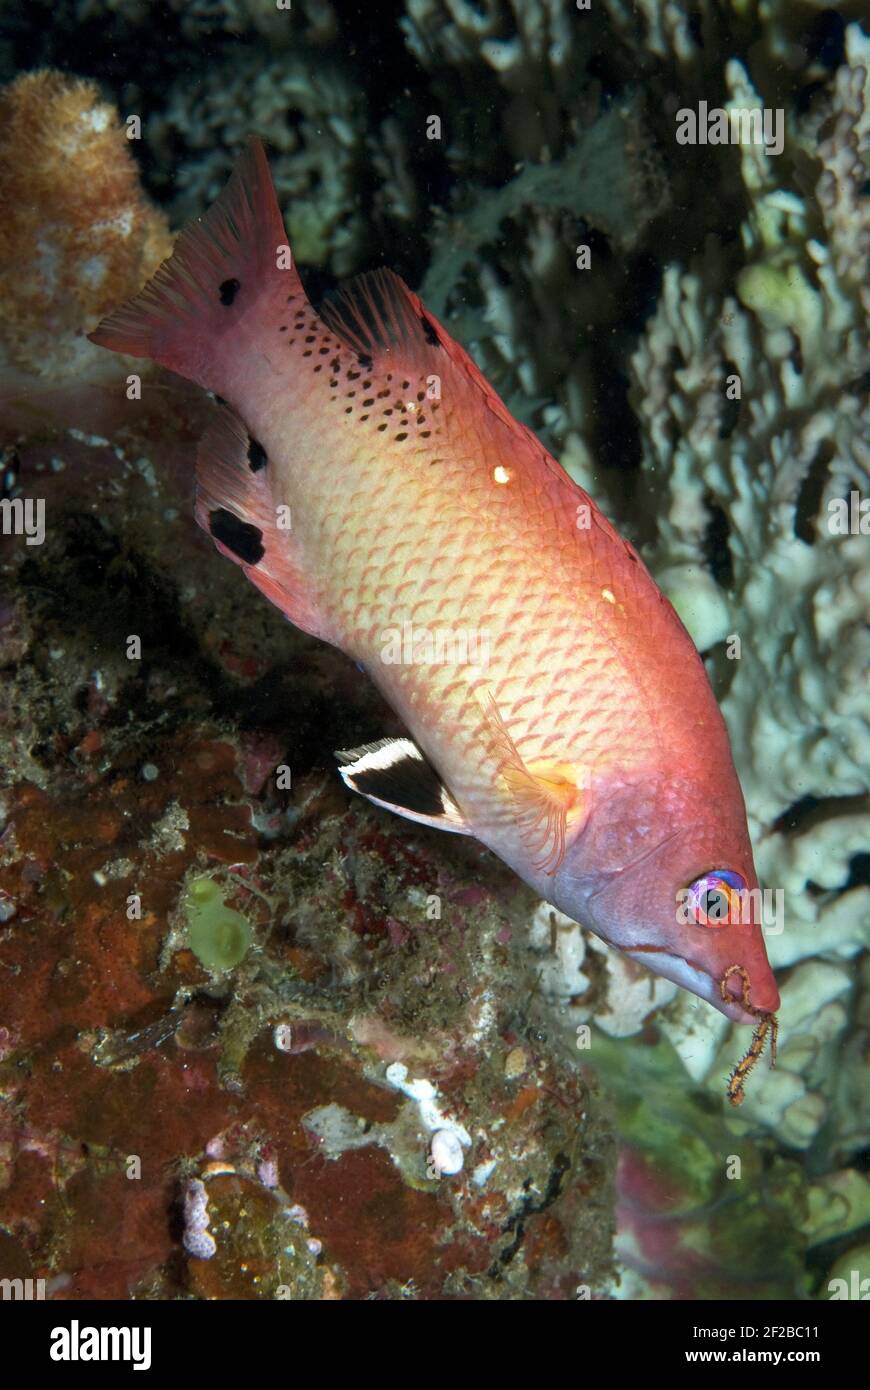 Redfin hogfish (Bodianus dictynna)  with brittle star in its mouth, Lembeh Strait, Sulawesi, Indonesia Stock Photo